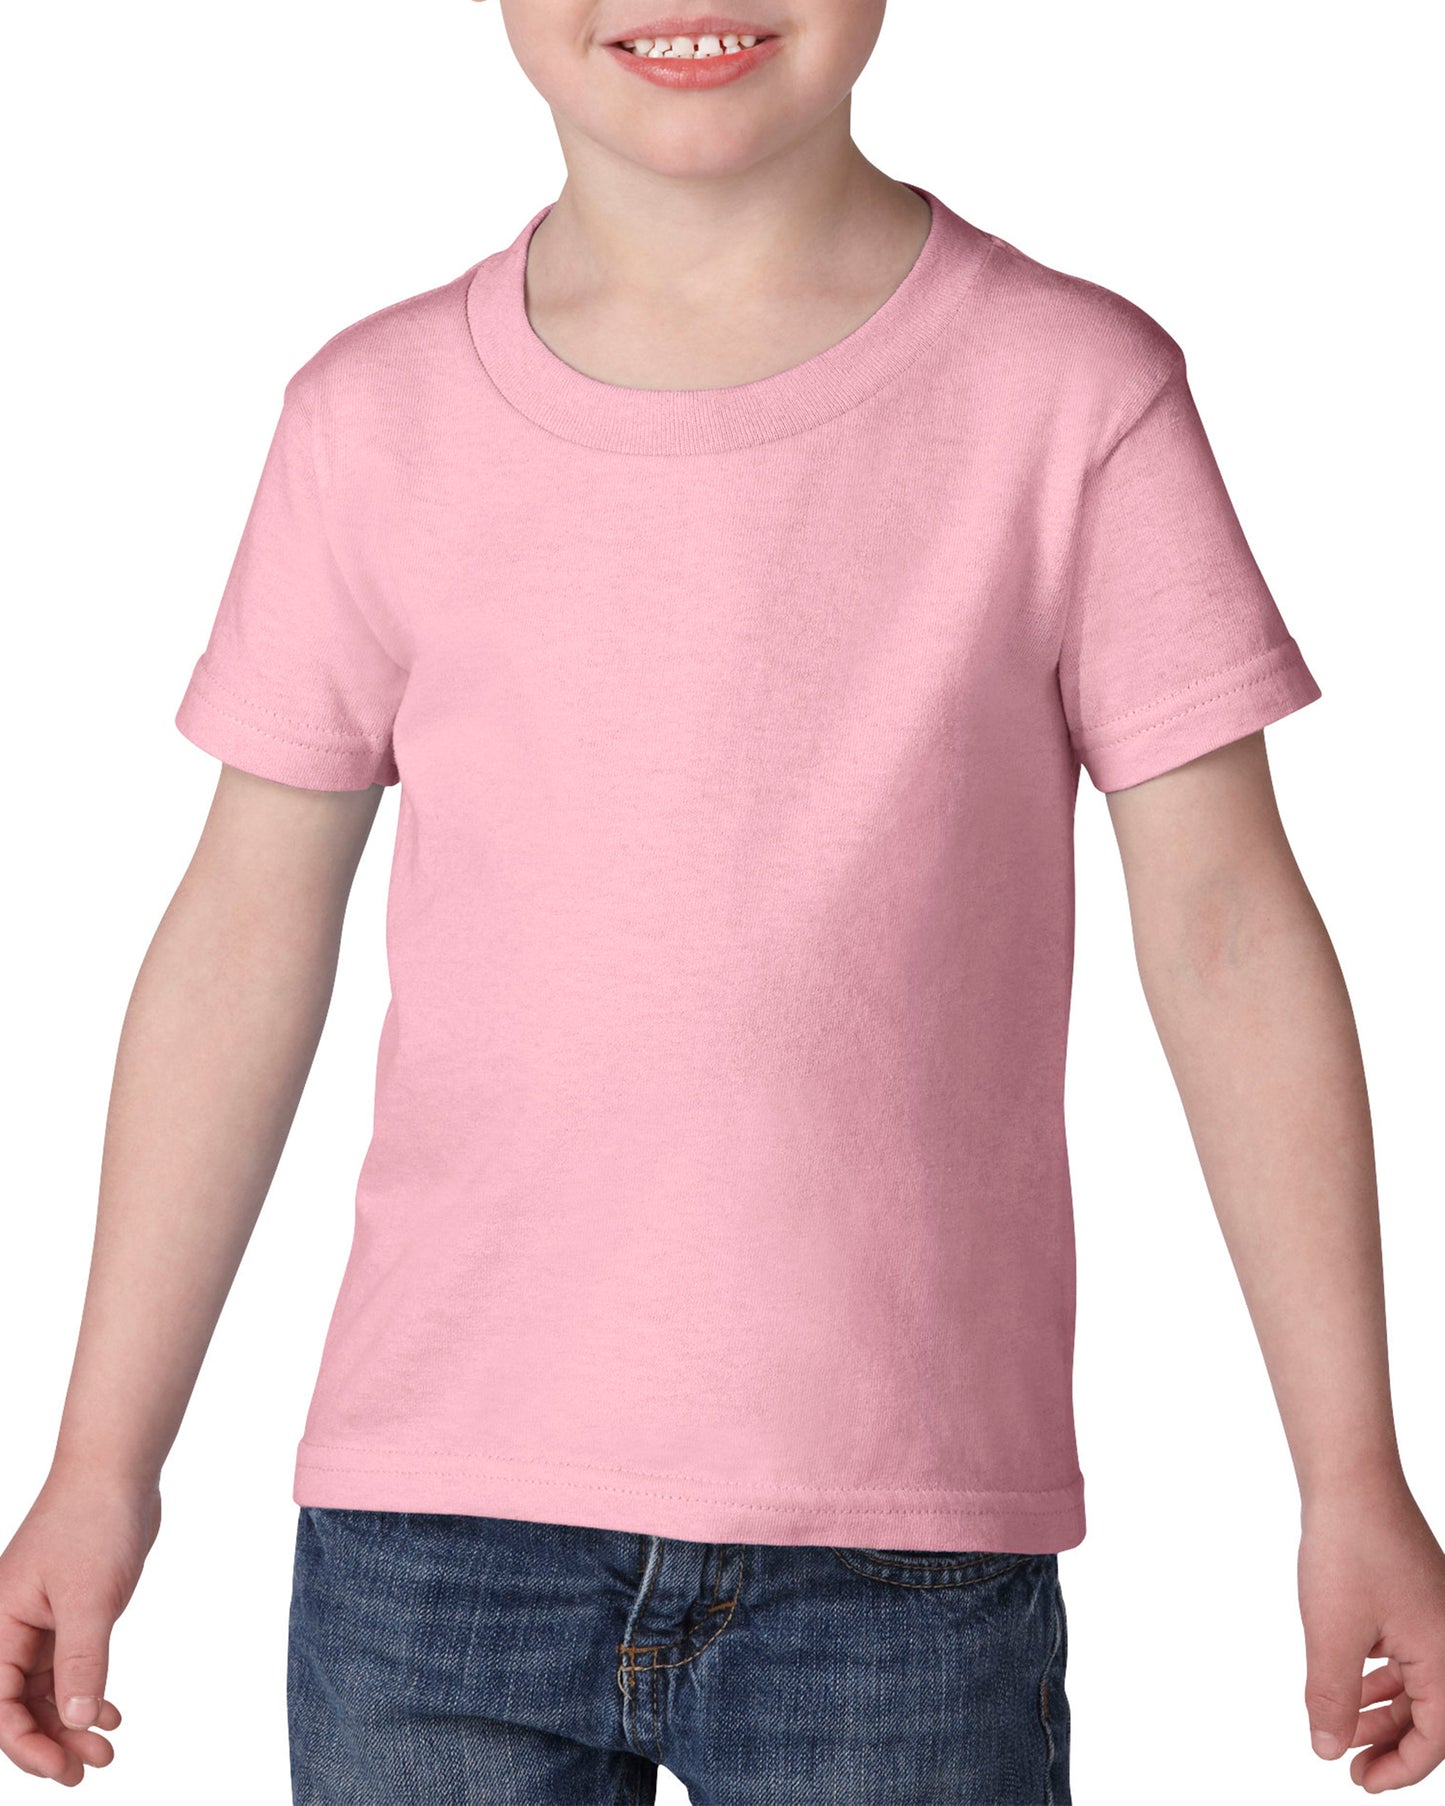 Toddler Heavy Cotton Tees